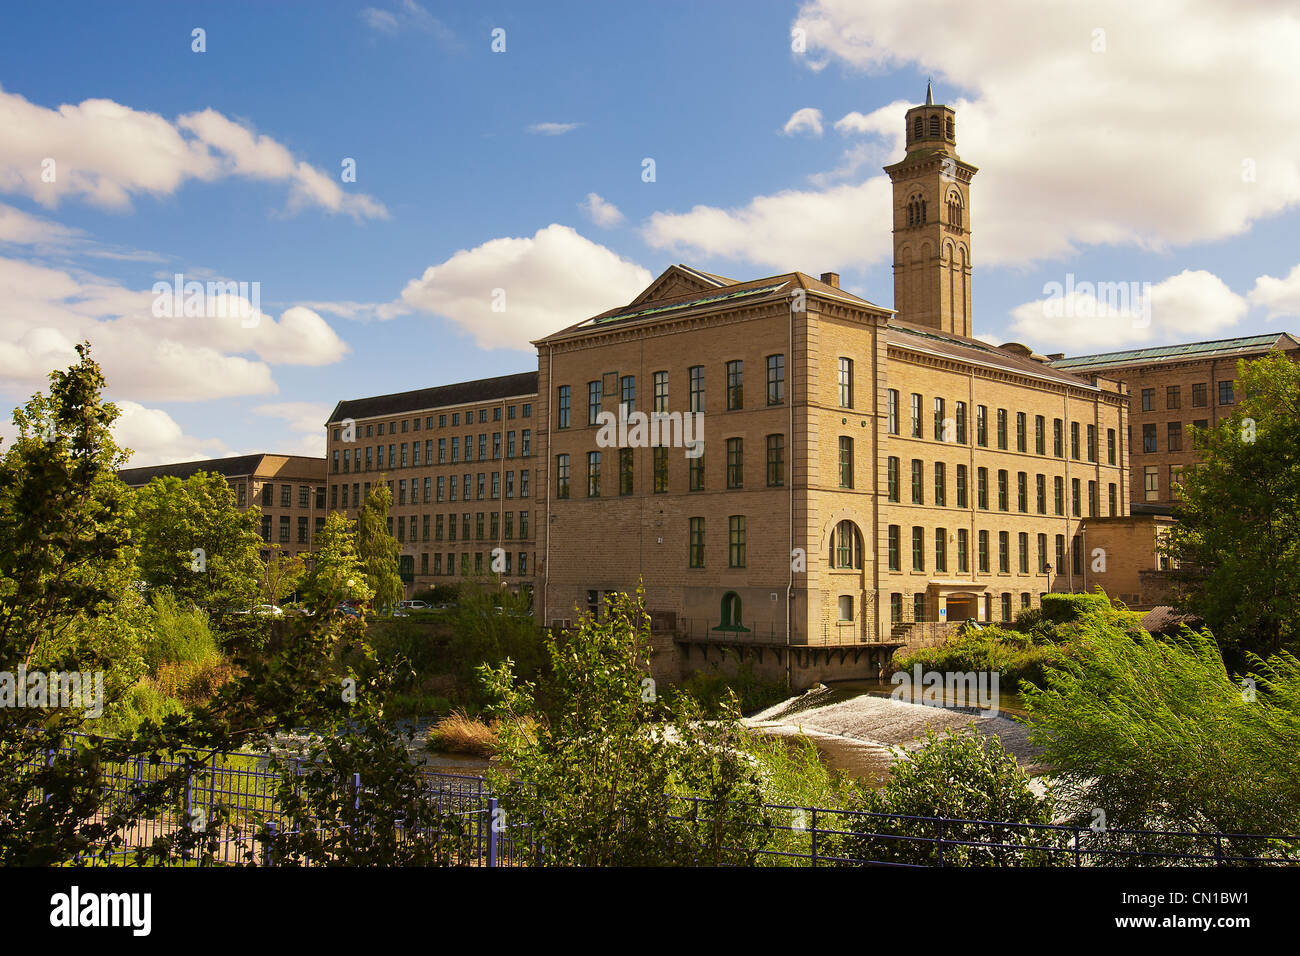 Sir Titus Salt's 'Saltaire', a victorian woolen and textile mill in Shipley, West Yorkshire, England, UK Stock Photo